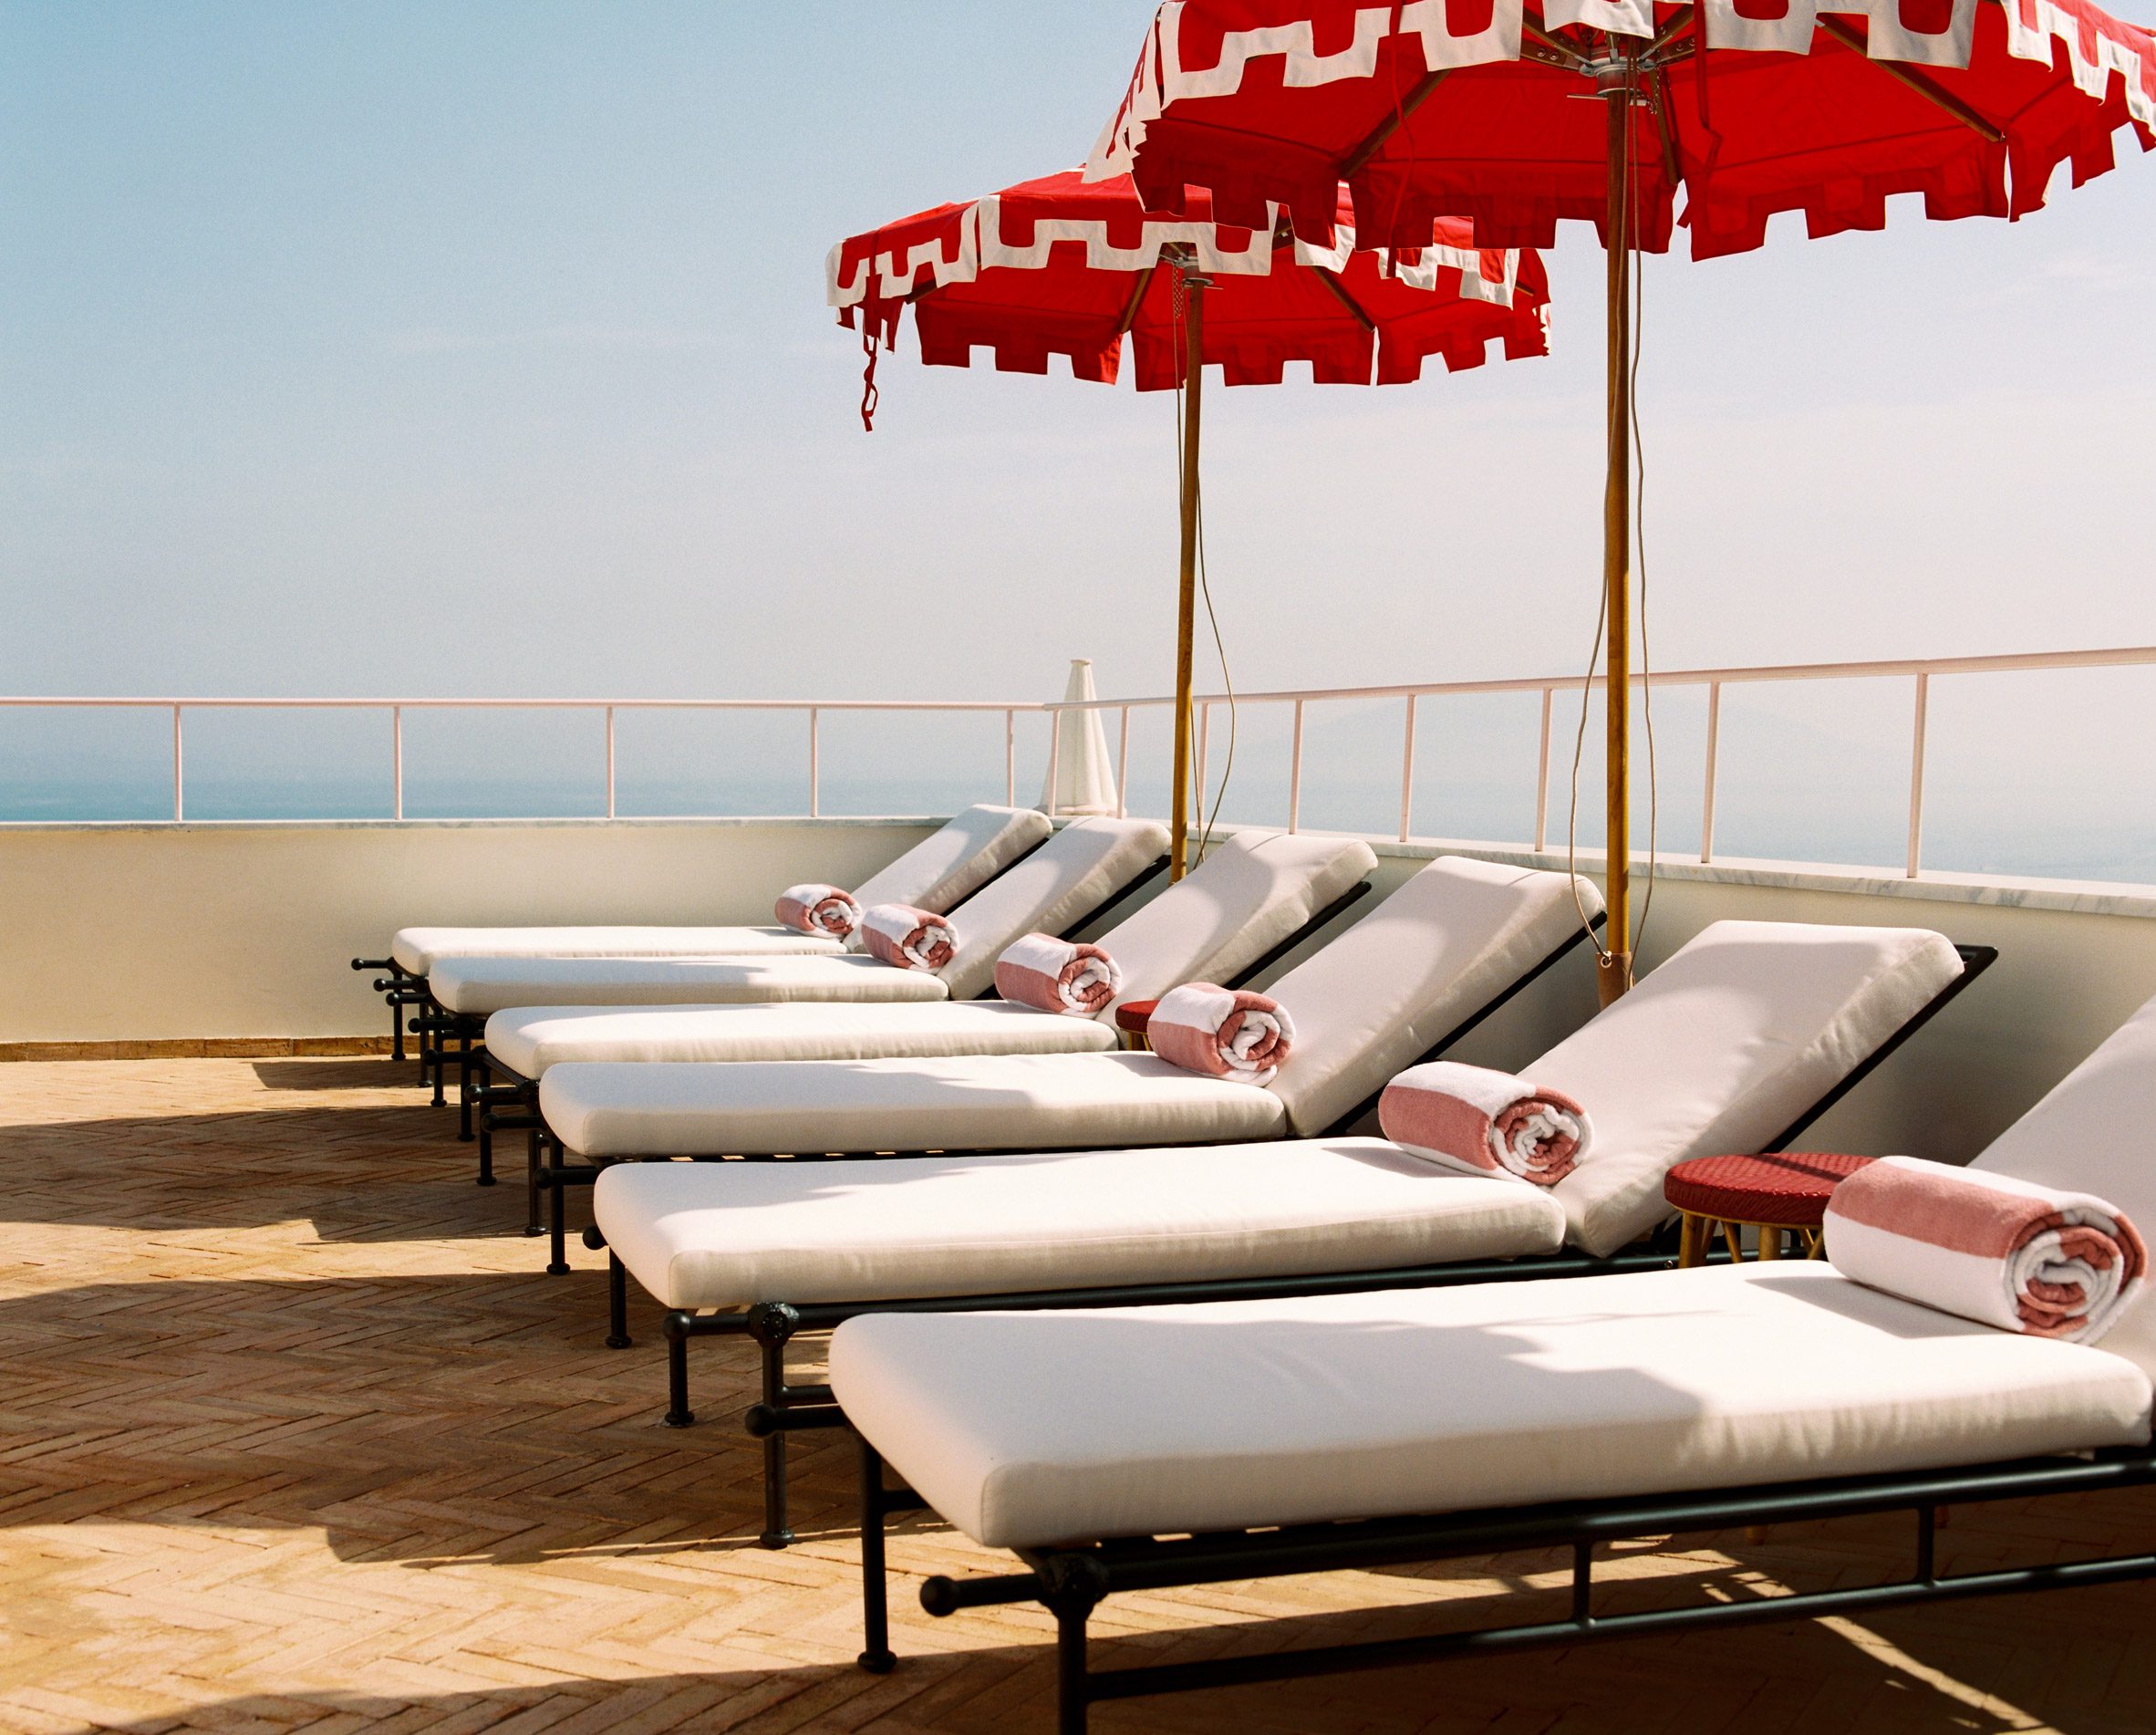 Sun loungers and red parasols